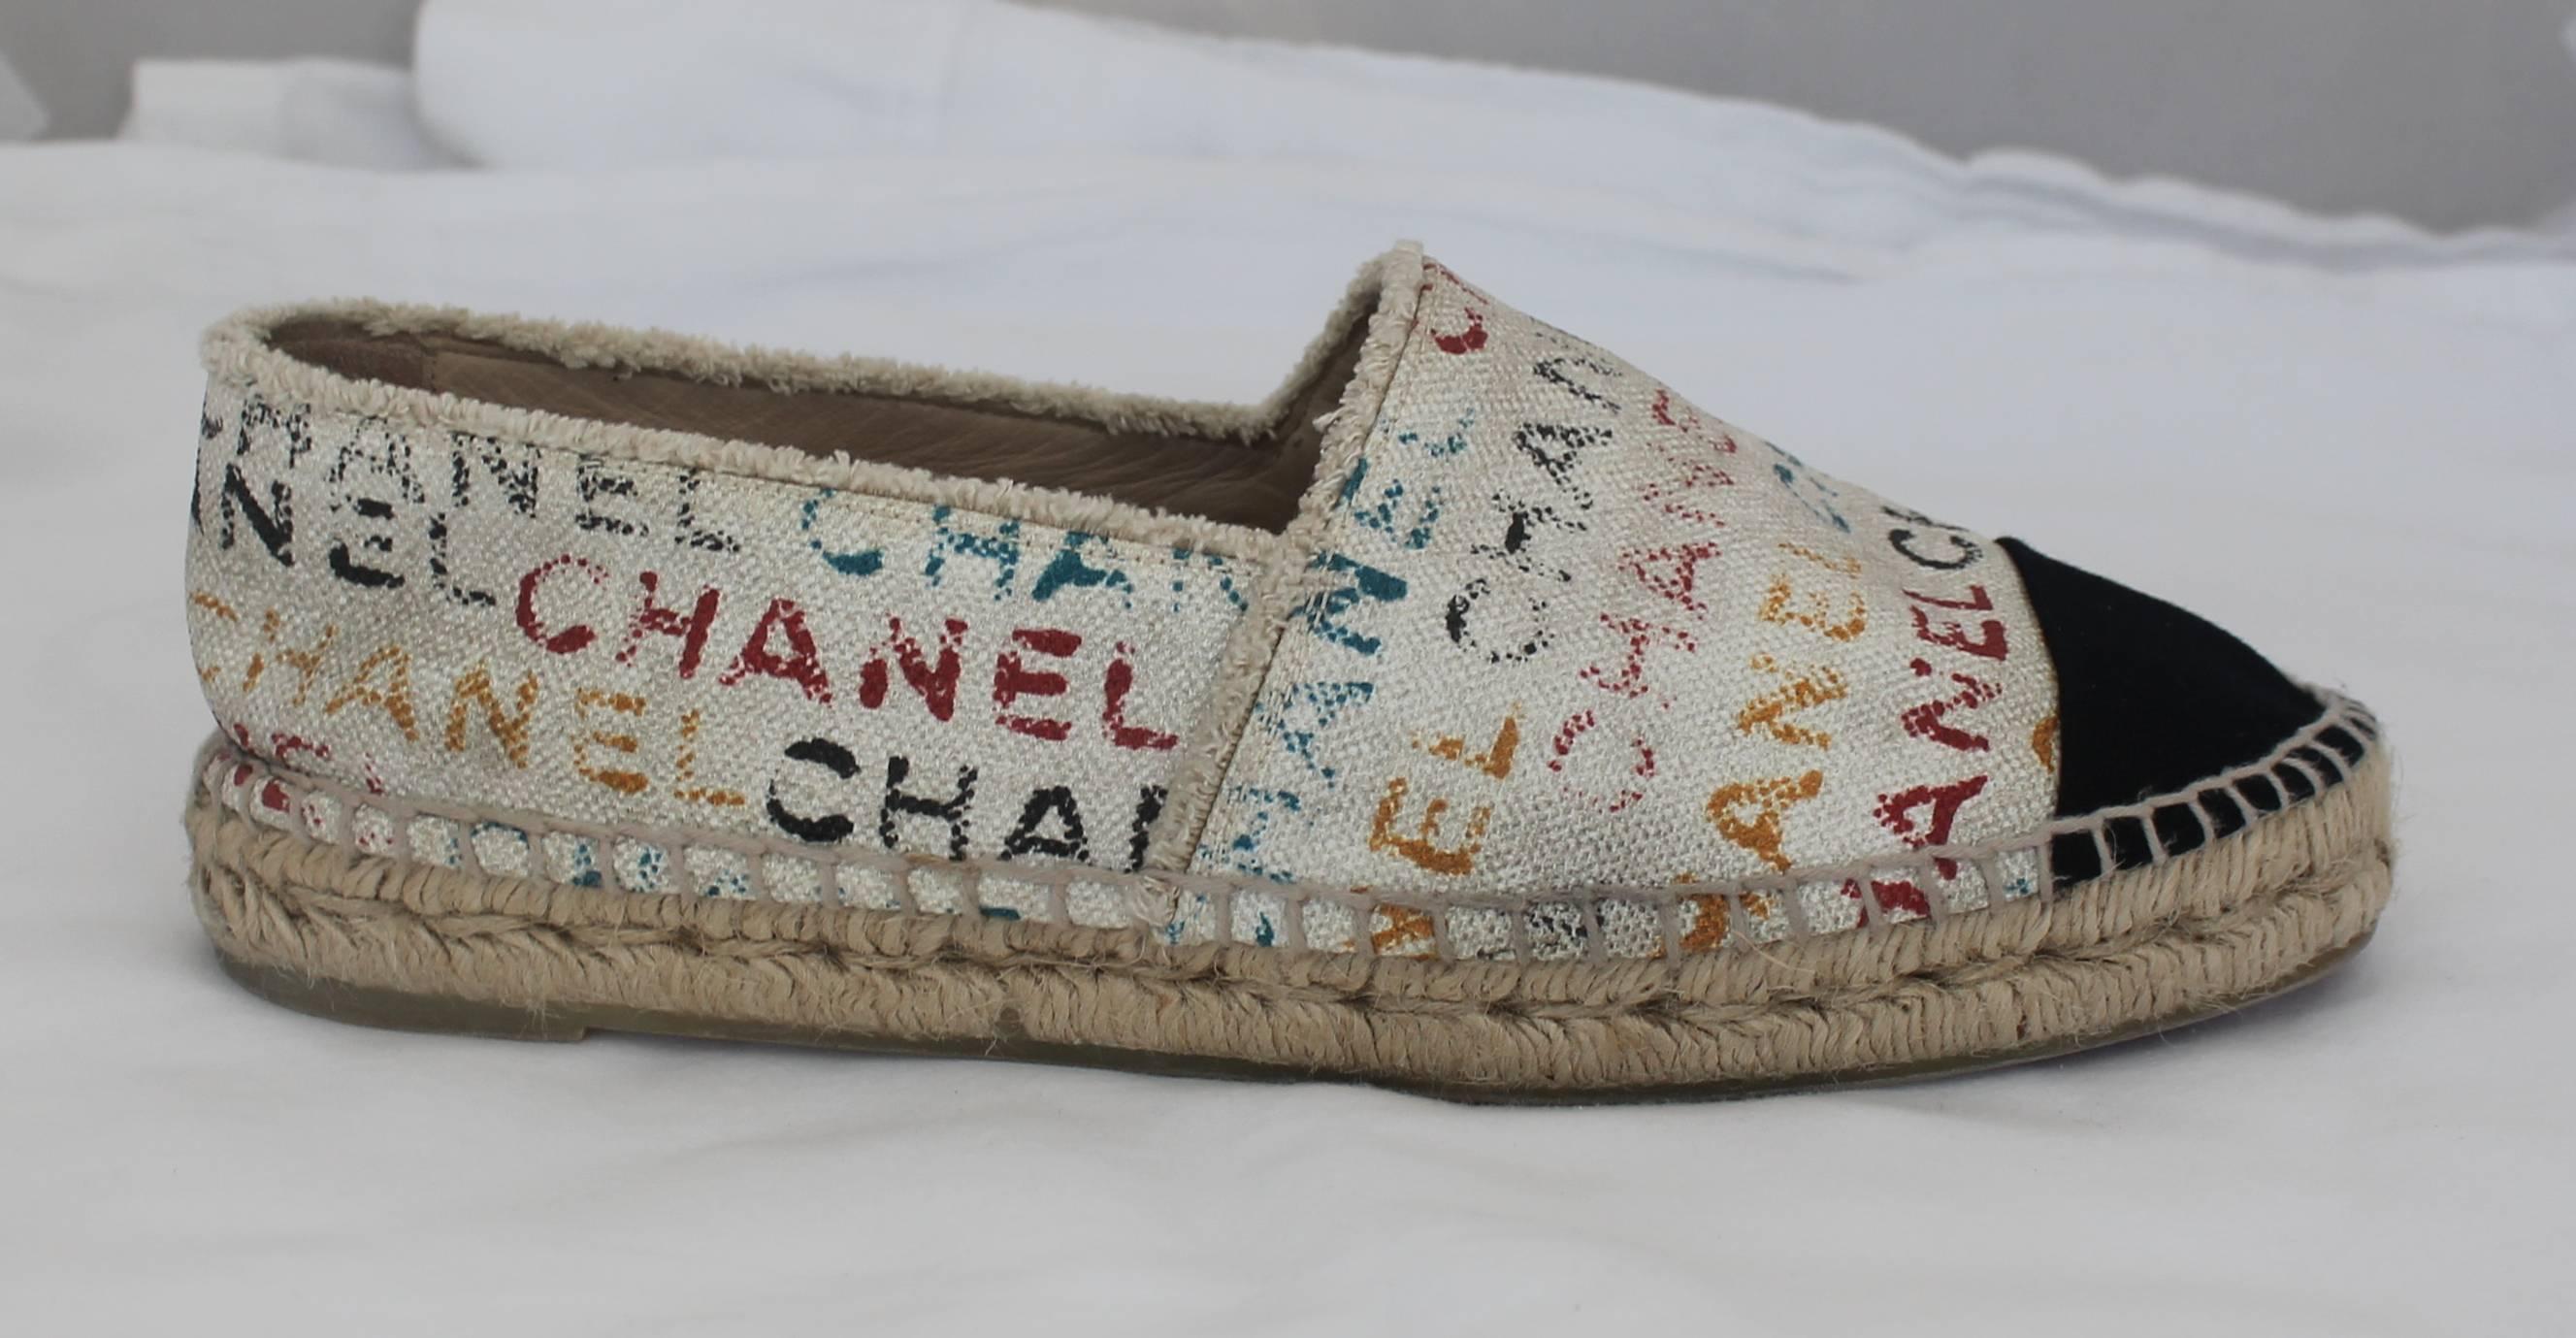 Chanel Black and Cream with Multi-Colored Print Flat Espadrilles - 41. These espadrilles are great for the summer! They are cream with a black toe and tan, rope material stitching. The cream part of the shoe is covered with the word 